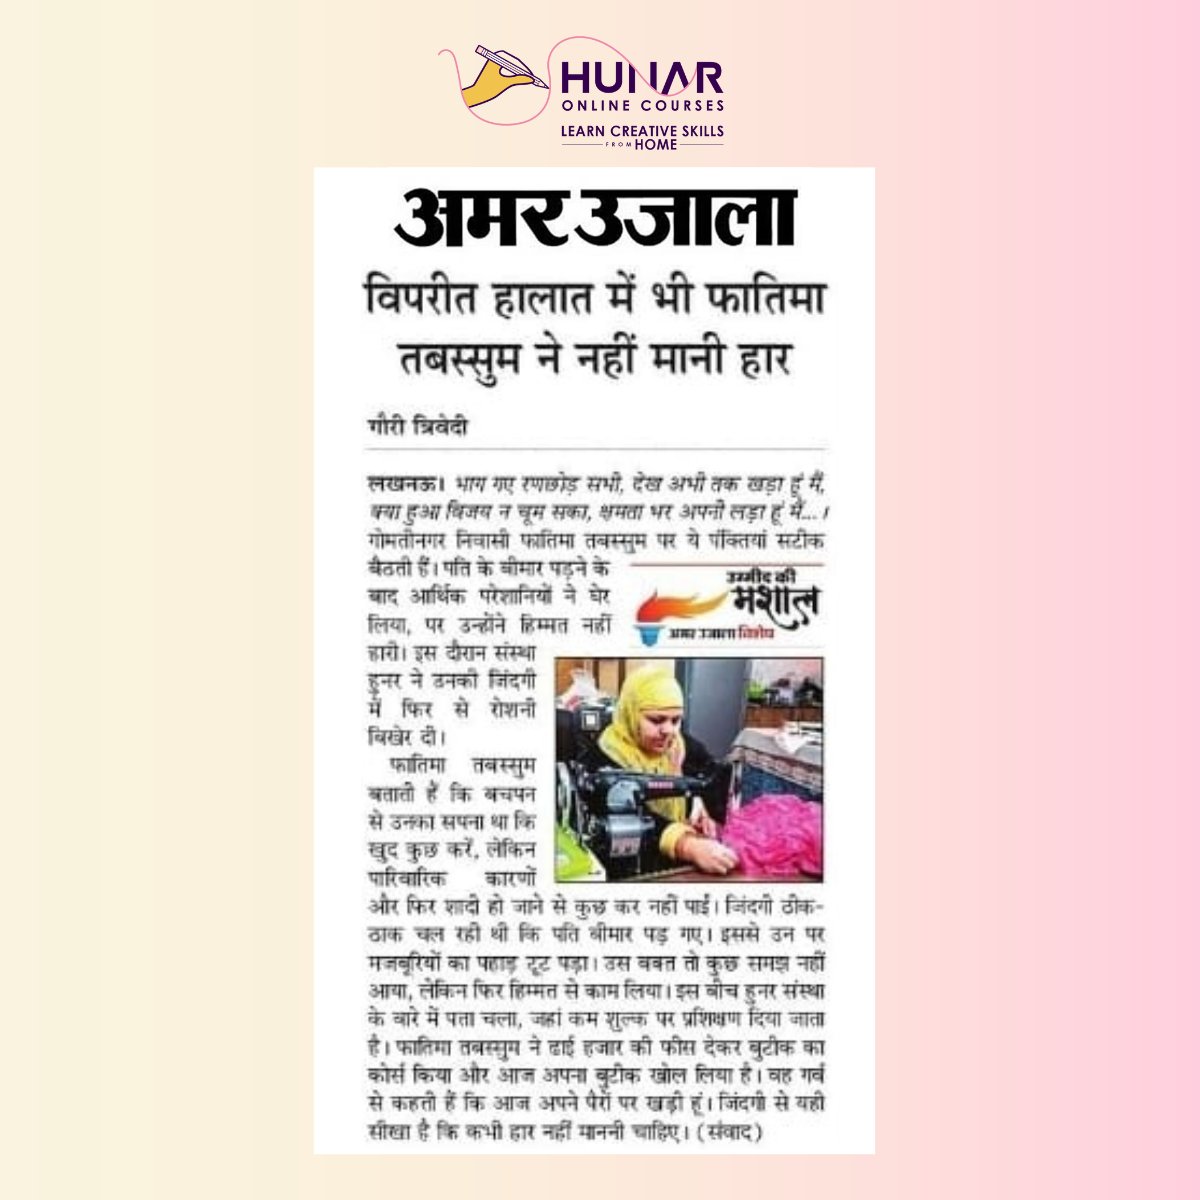 Read all about our student, Fatima Tabassum in Amar Ujala as she shares her journey from skill to success with Hunar!

In the face of severe hardships, she found a way to turn her passion into her strength and is an inspiration for us all.
#hunarsepehchaan